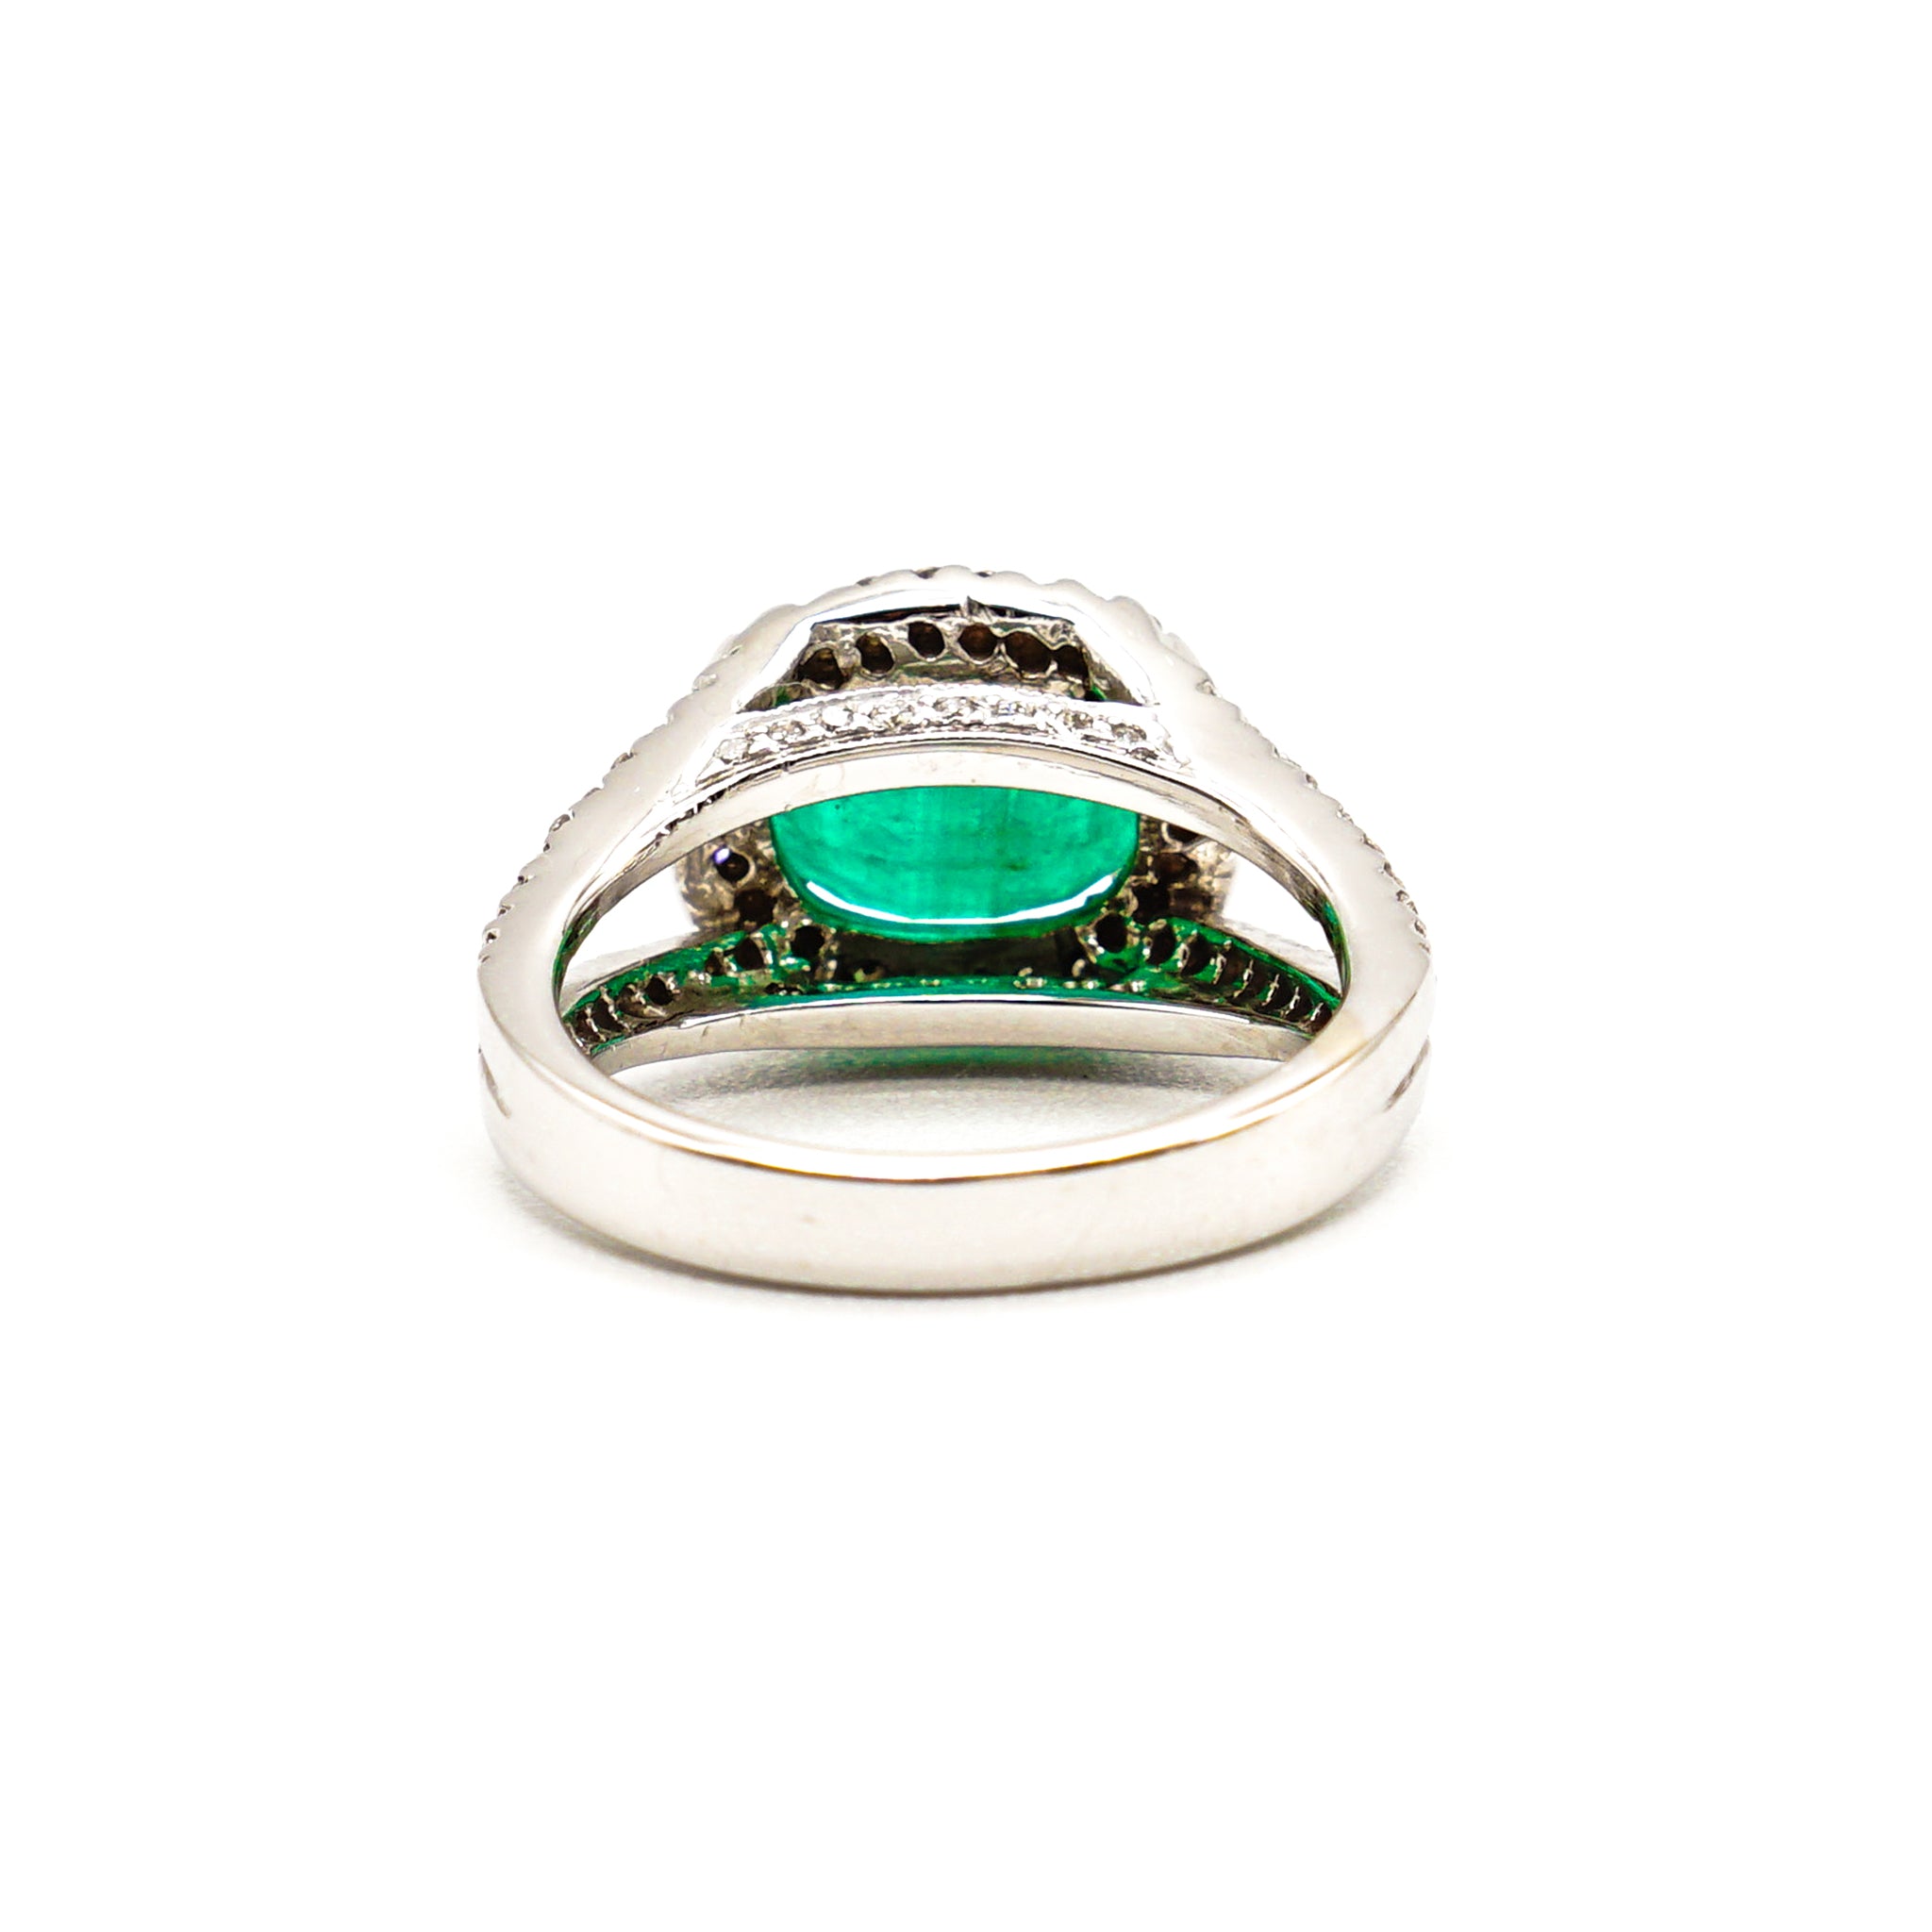 14K White Gold 3CT Oval Emerald Halo Ring with Diamonds - Le Vive Jewelry in Riverside